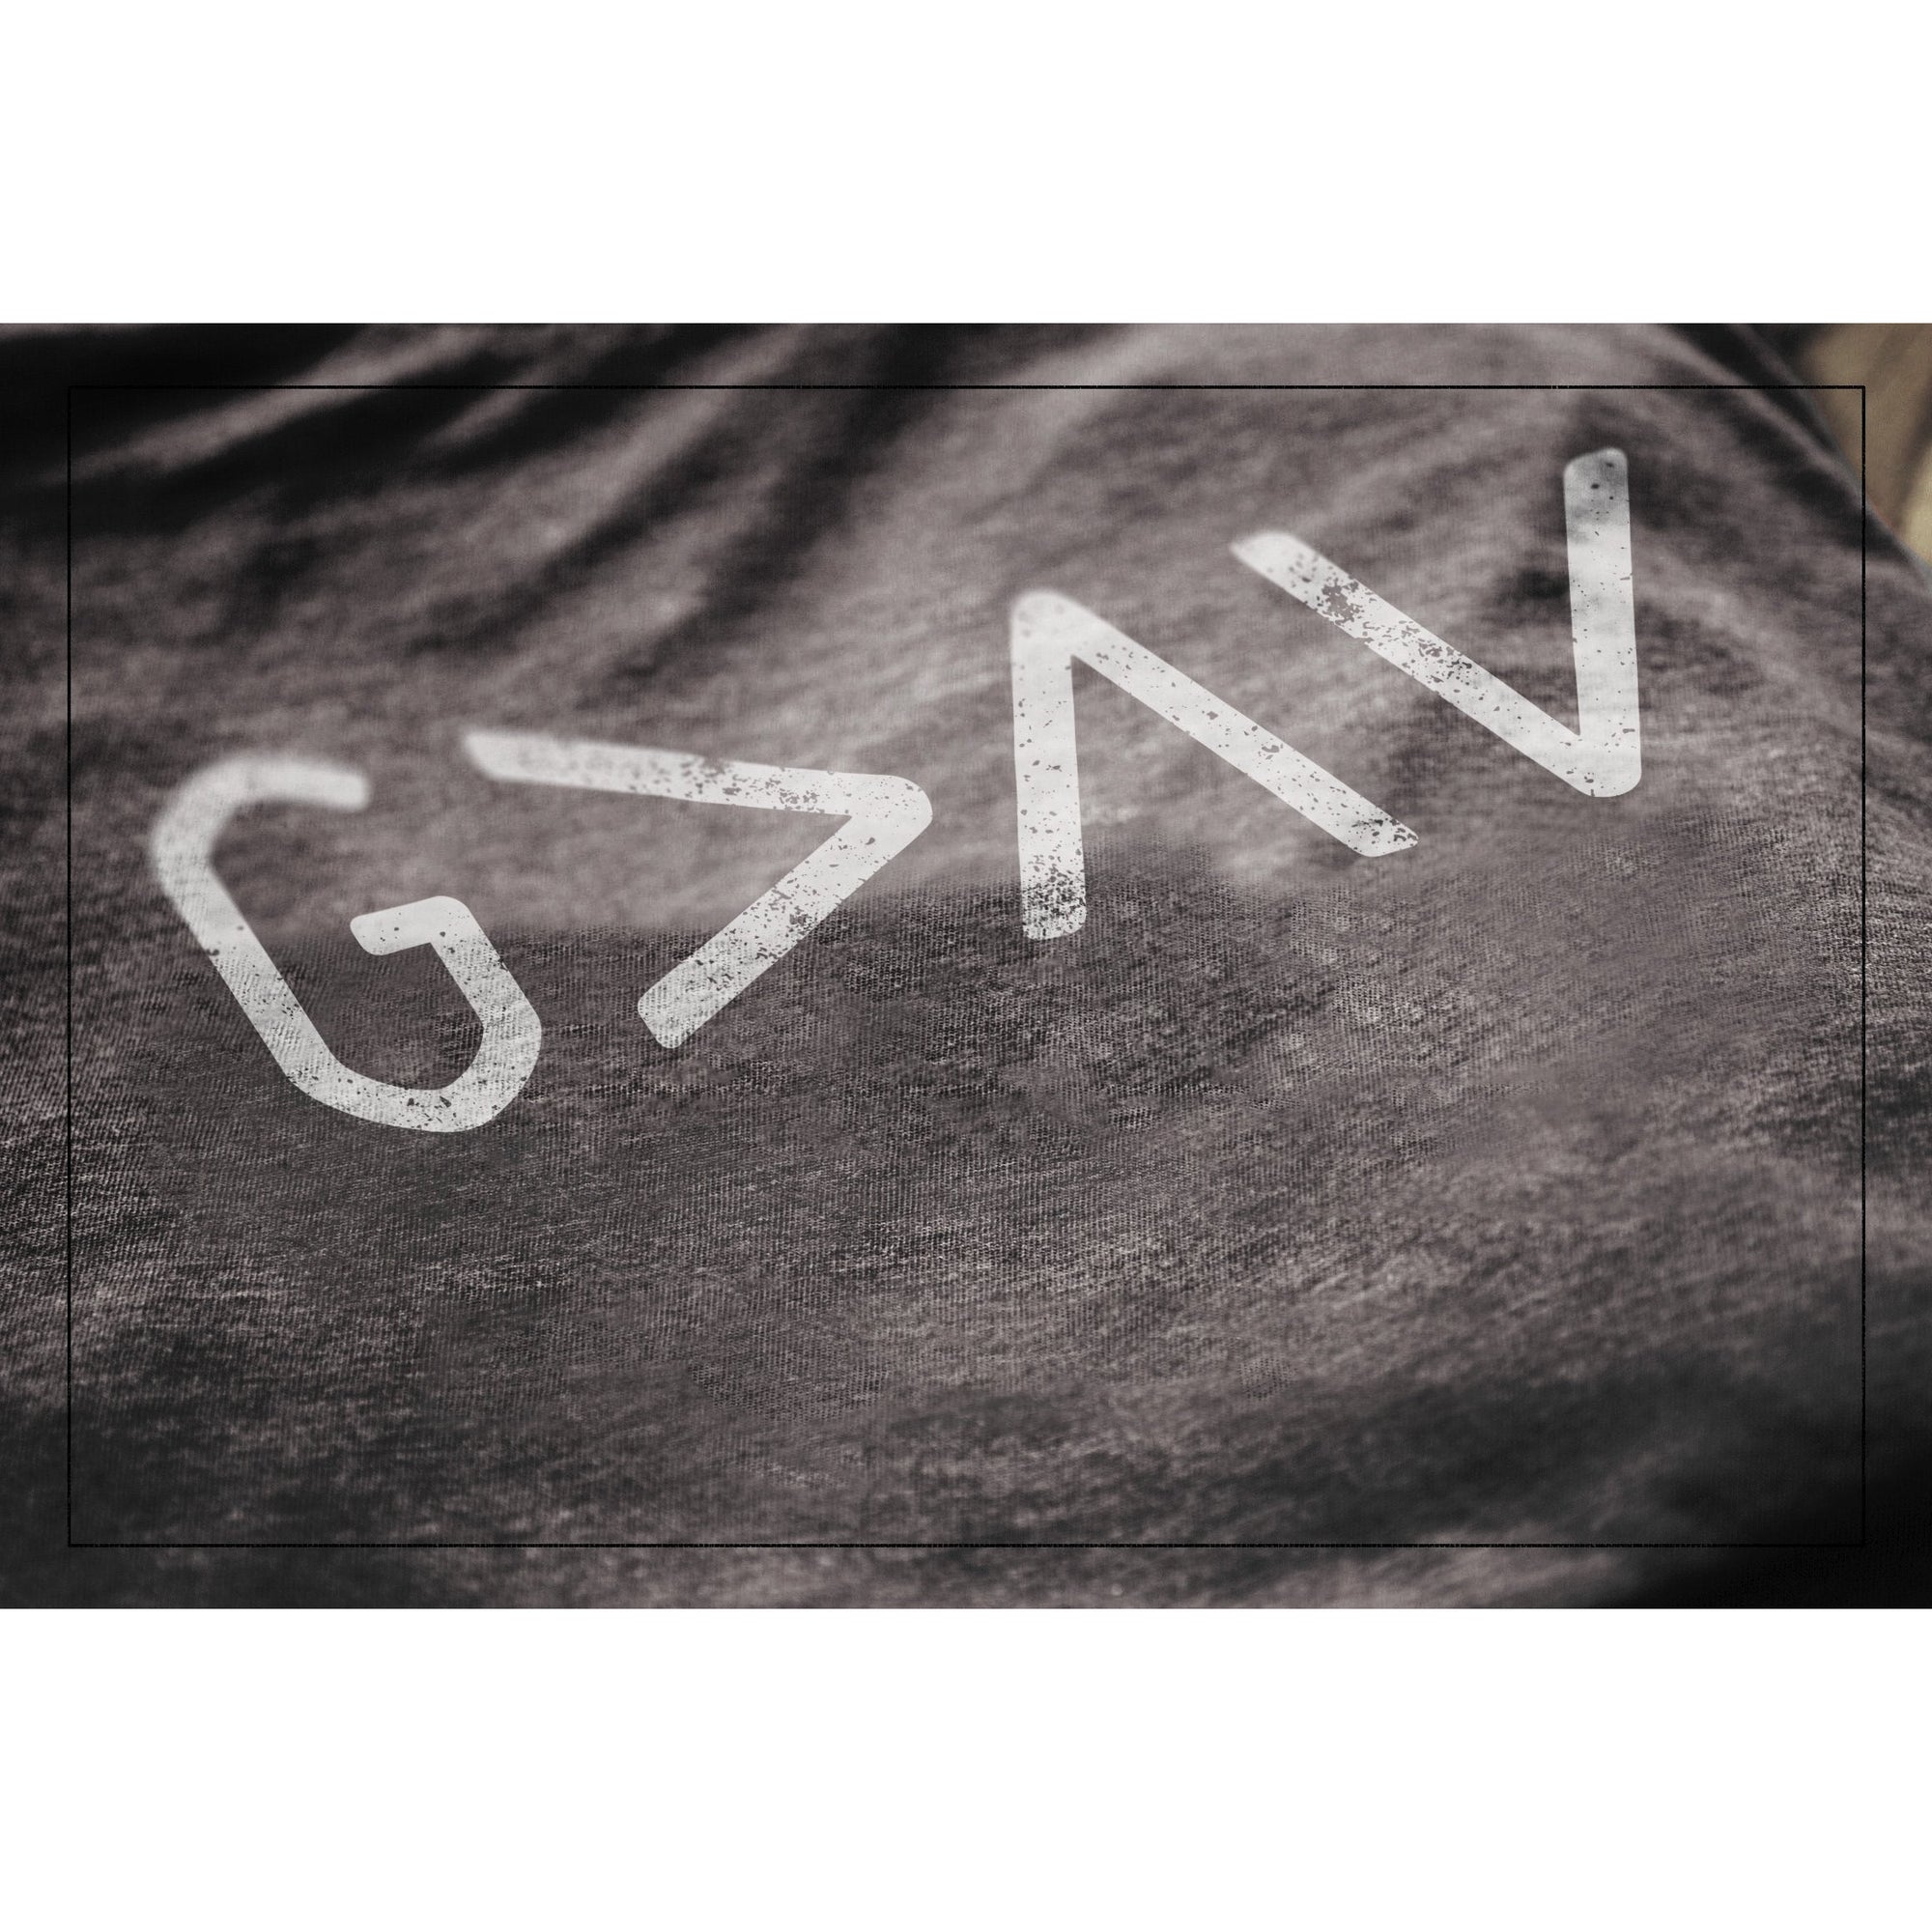 God Is Greater Than The Highs And Lows Charcoal Printed Graphic Men's Crew T-Shirt Tee Closeup Details